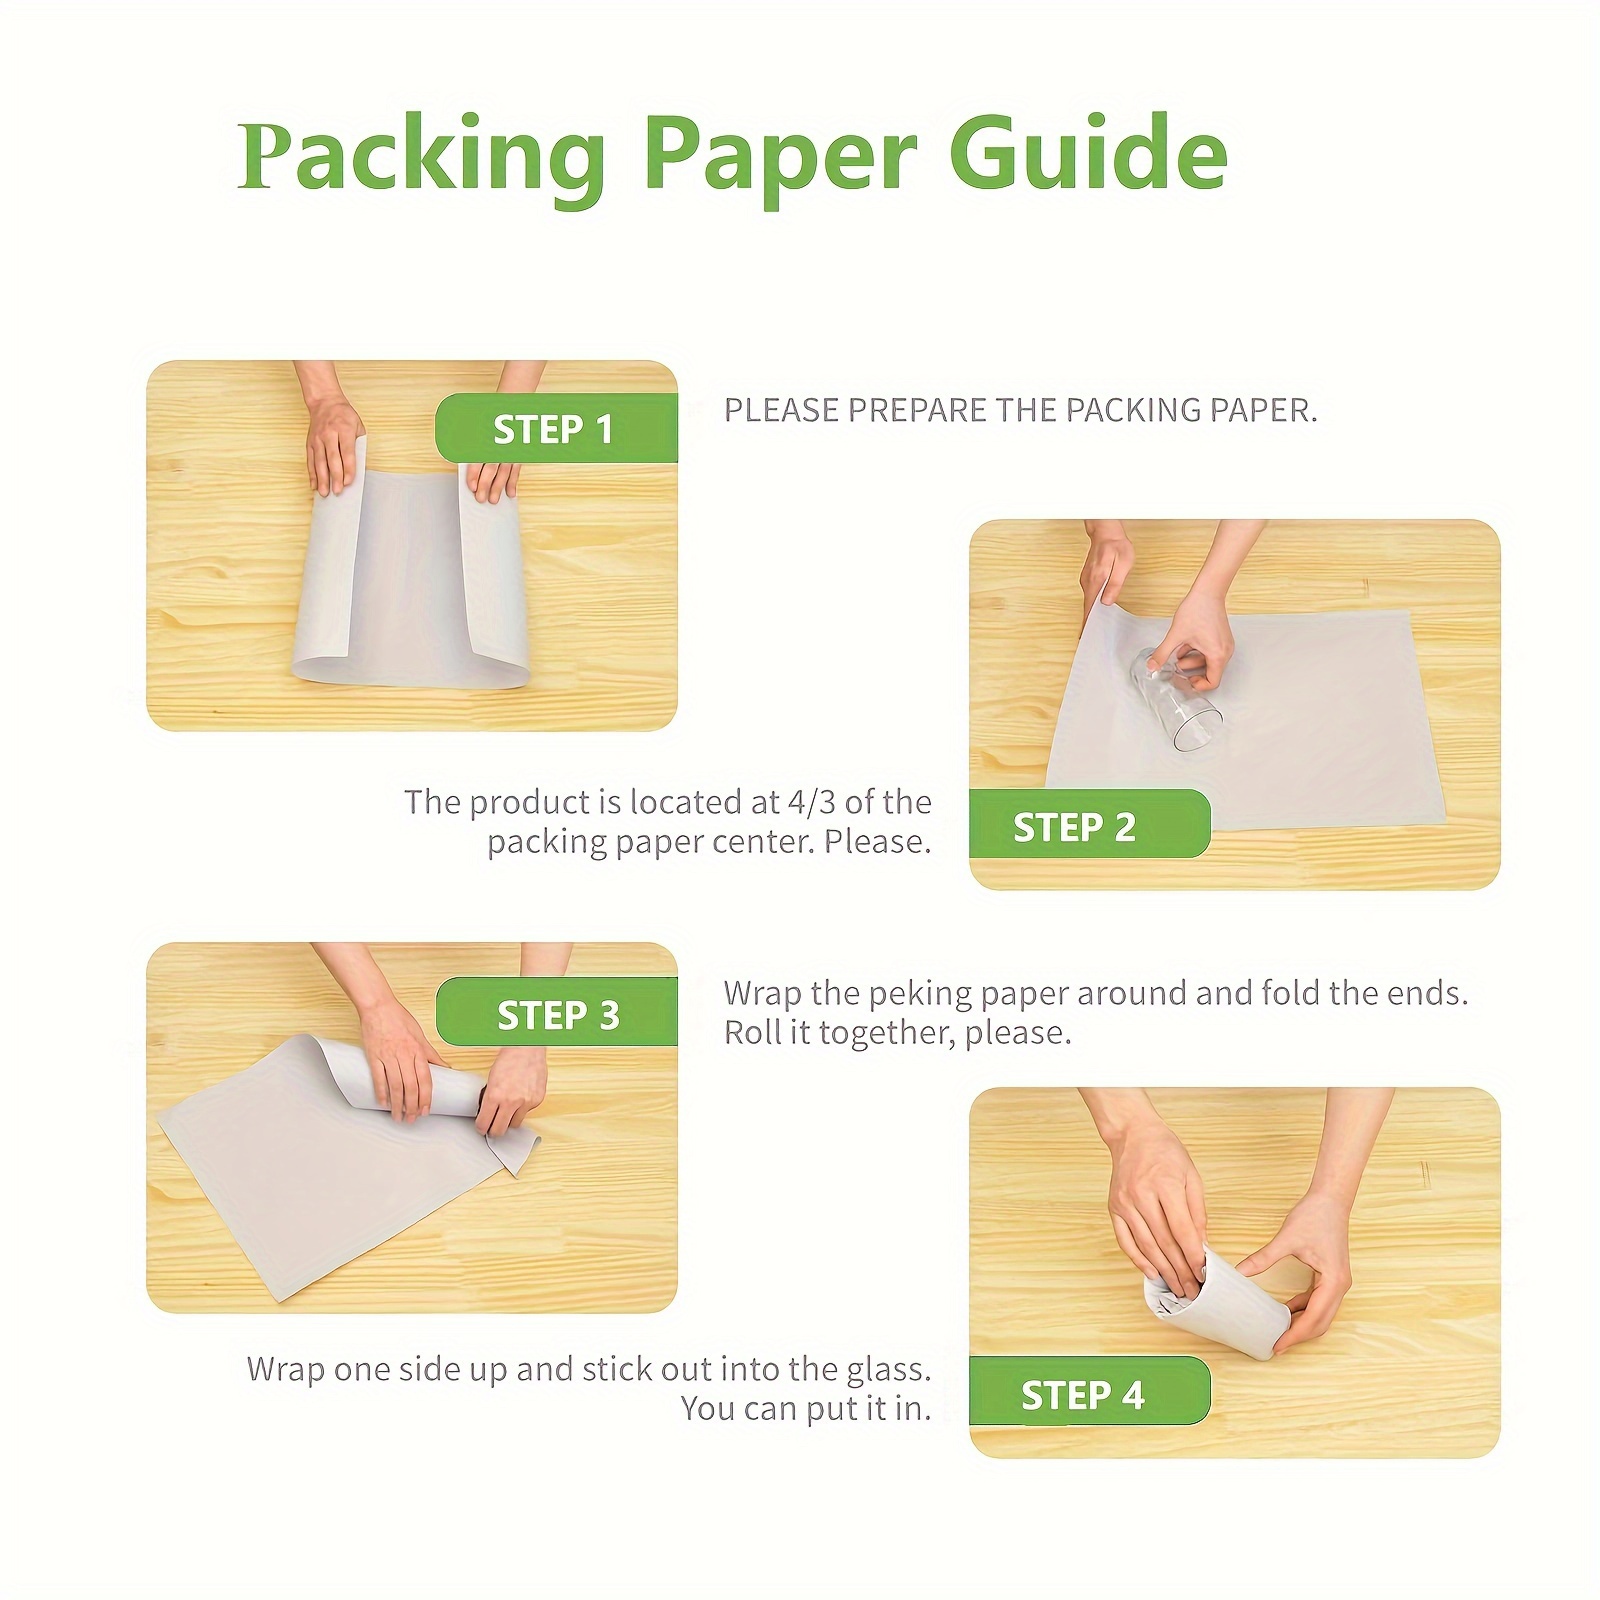 WAUPPY Newsprint Packing Paper Sheets for Moving, Shipping, Box Filler, Wrapping and Protecting Fragile Items 1.8 lbs (70 Sheets, 26” x 15”)